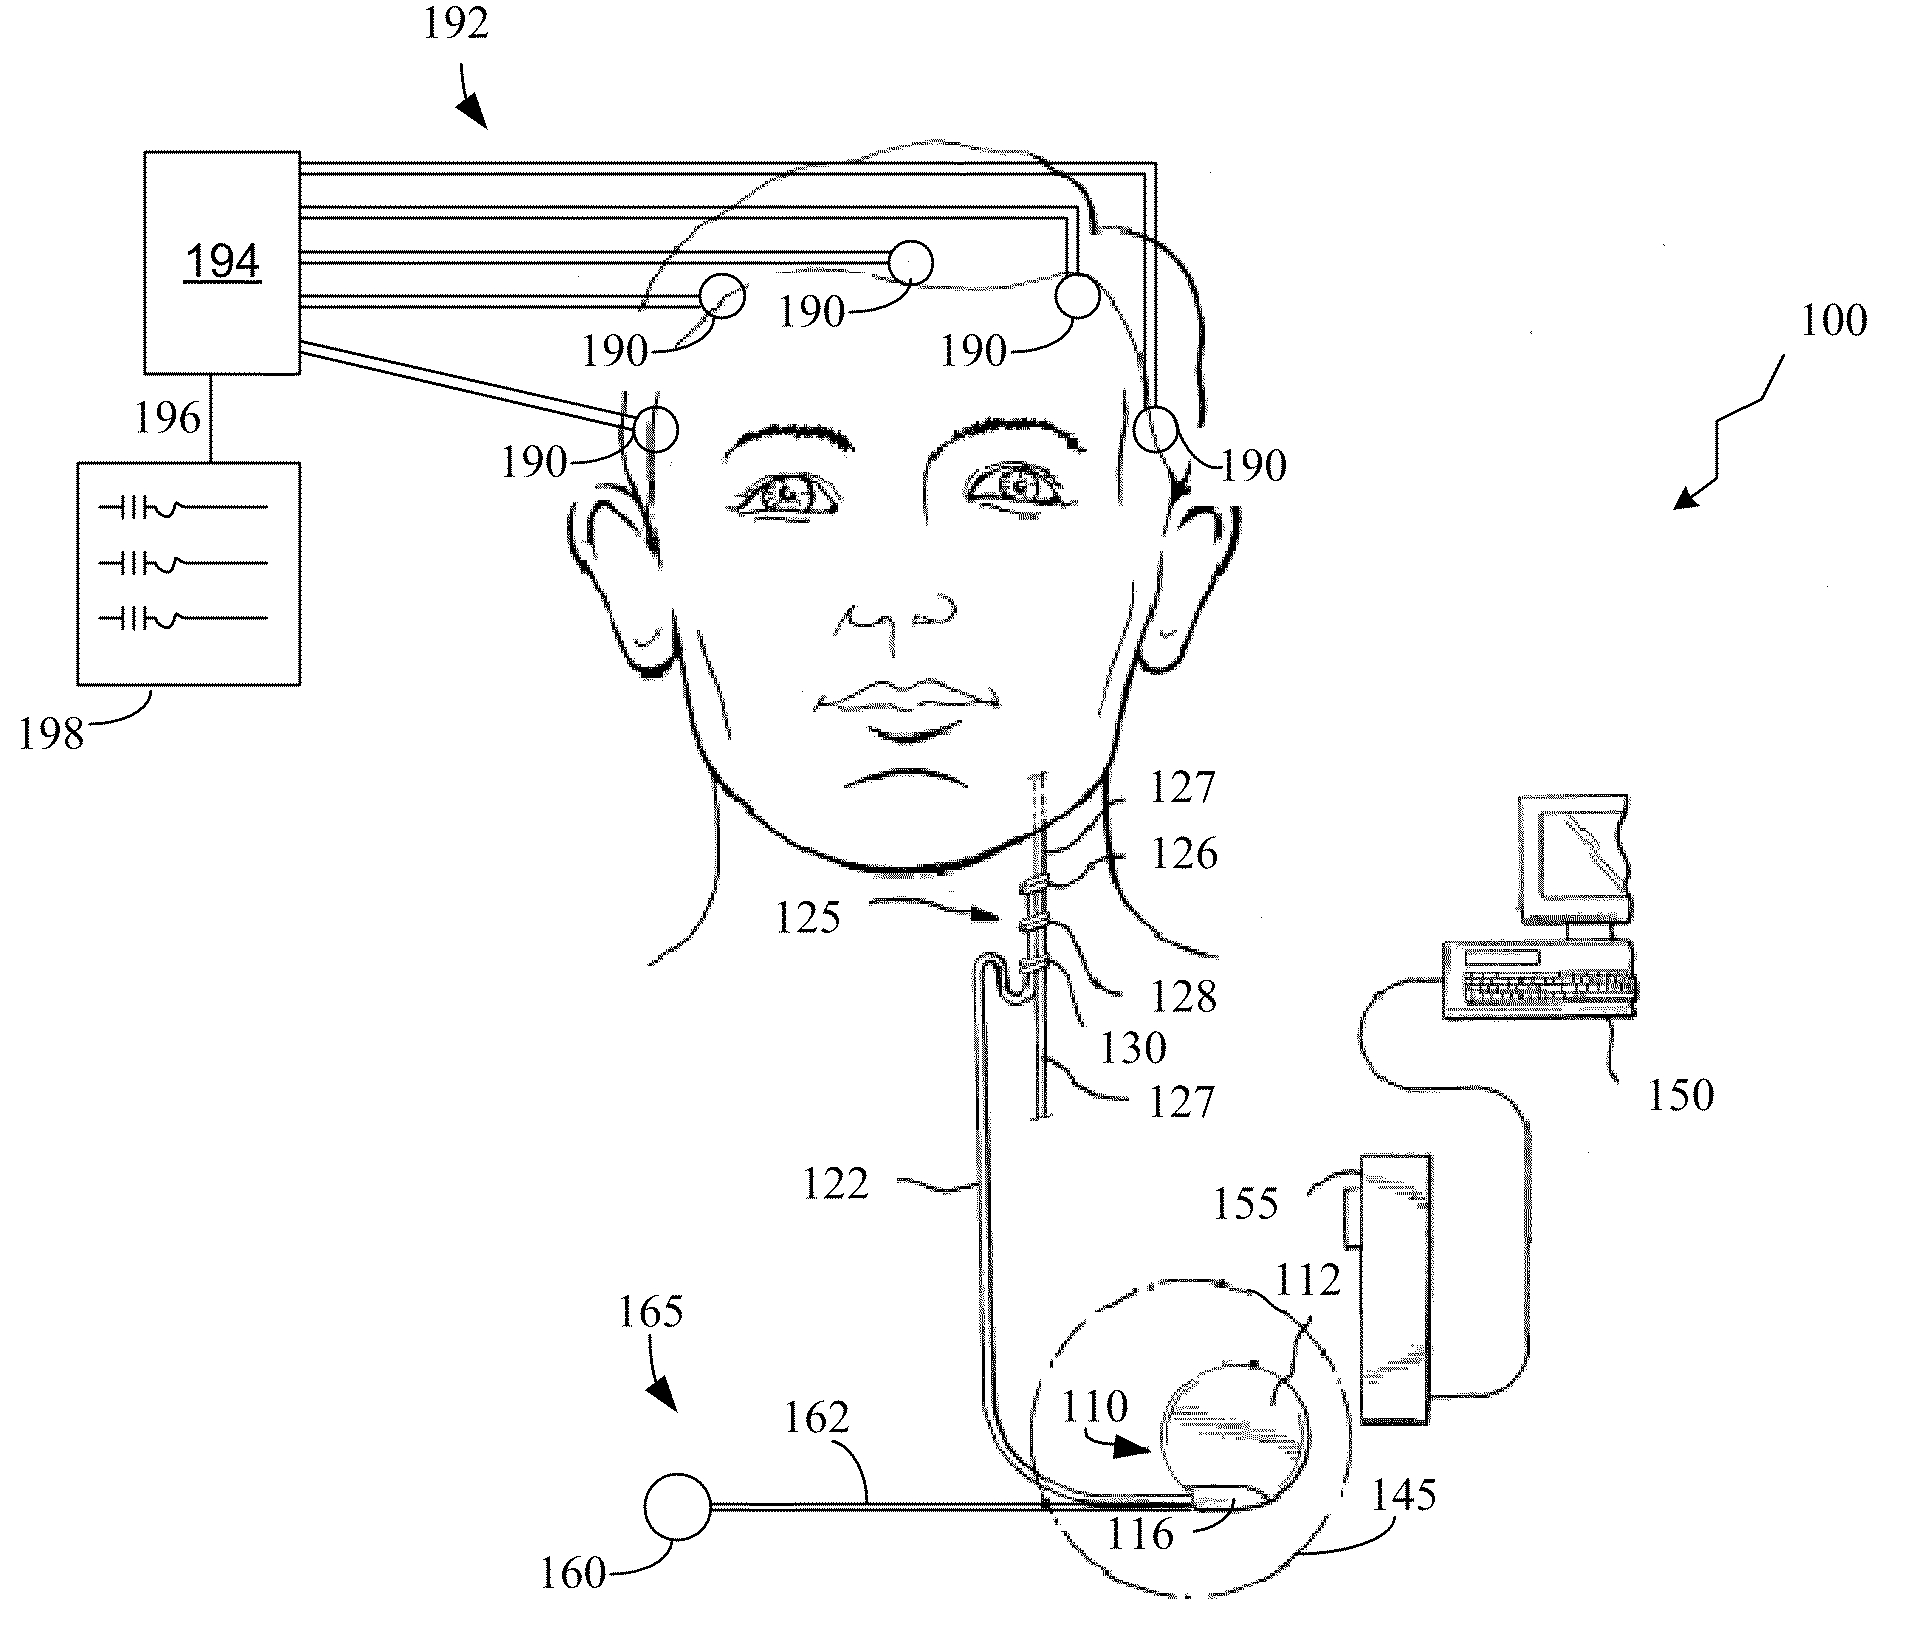 Implantable Medical Device for Providing Chronic Condition Therapy and Acute Condition Therapy Using Vagus Nerve Stimulation